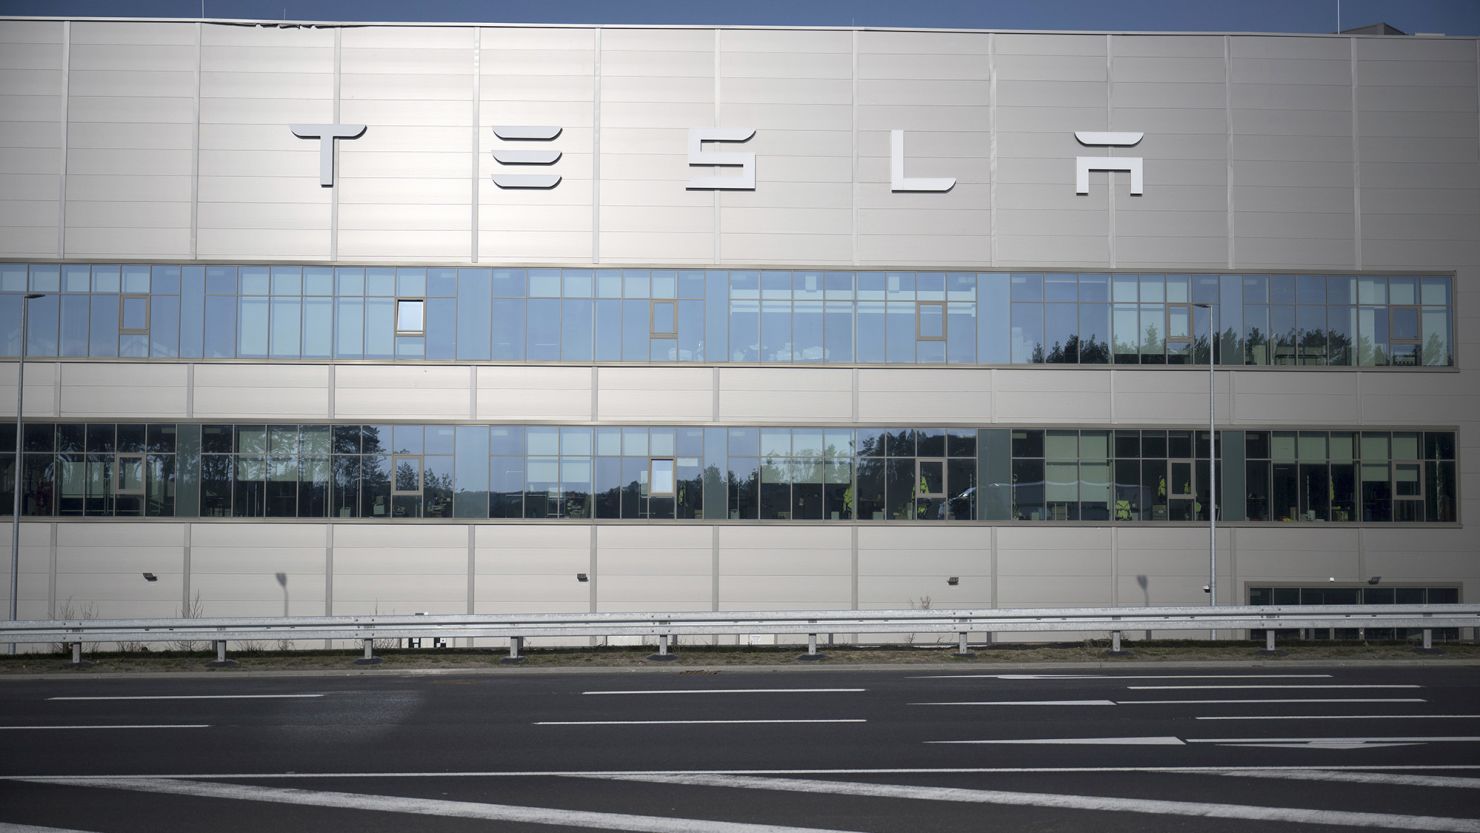 Fire Halts Production at Tesla’s Berlin Factory, Suspected Arson Attack